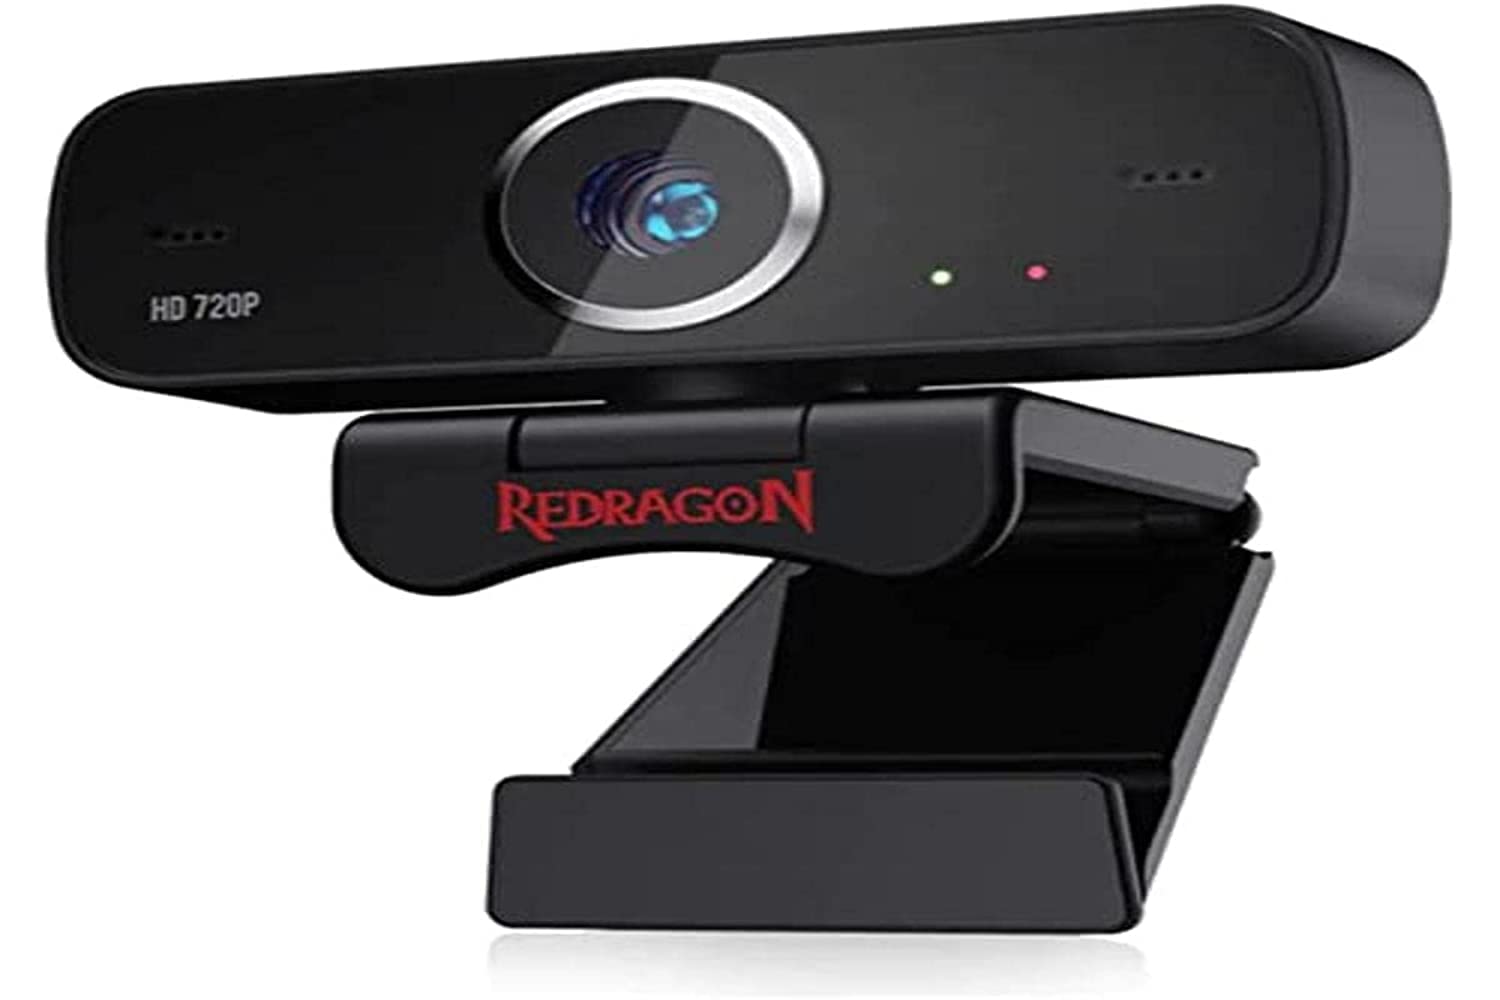 REDRAGON FOBOS GW600 720P Webcam with Built-in Dual Microphone